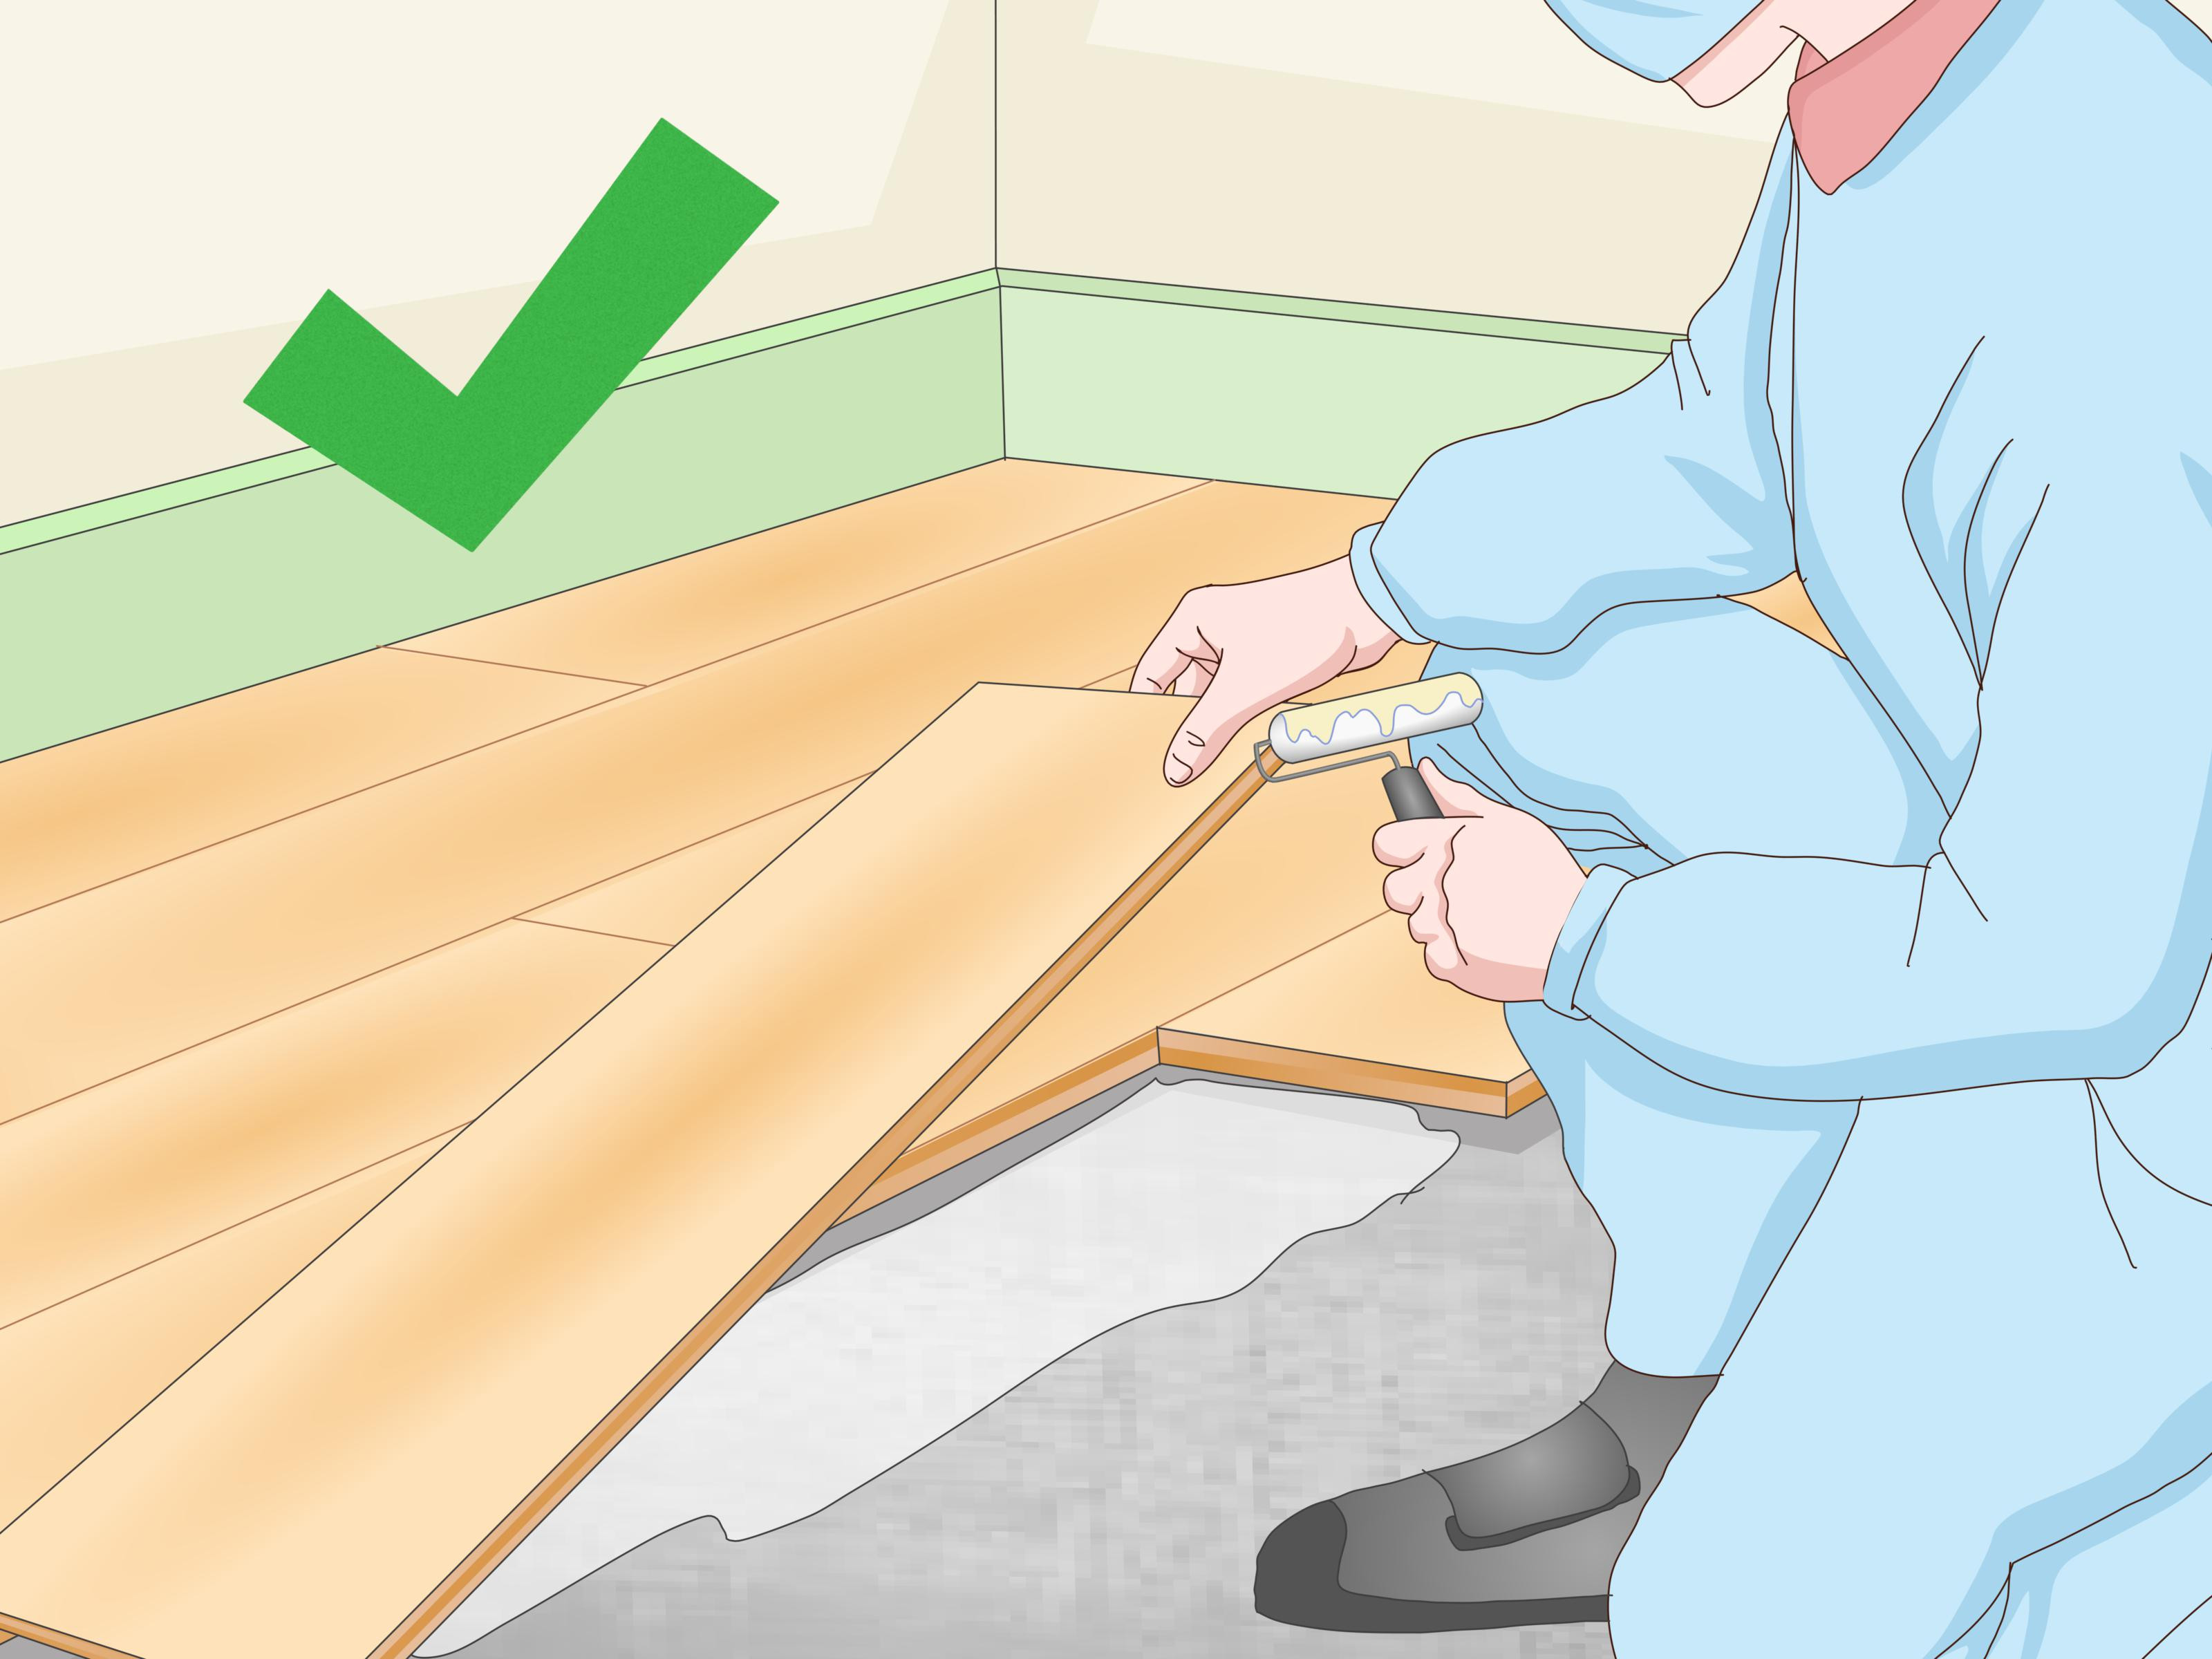 hardwood floor acclimation of 3 ways to close gaps in laminate flooring wikihow pertaining to close gaps in laminate flooring step 13